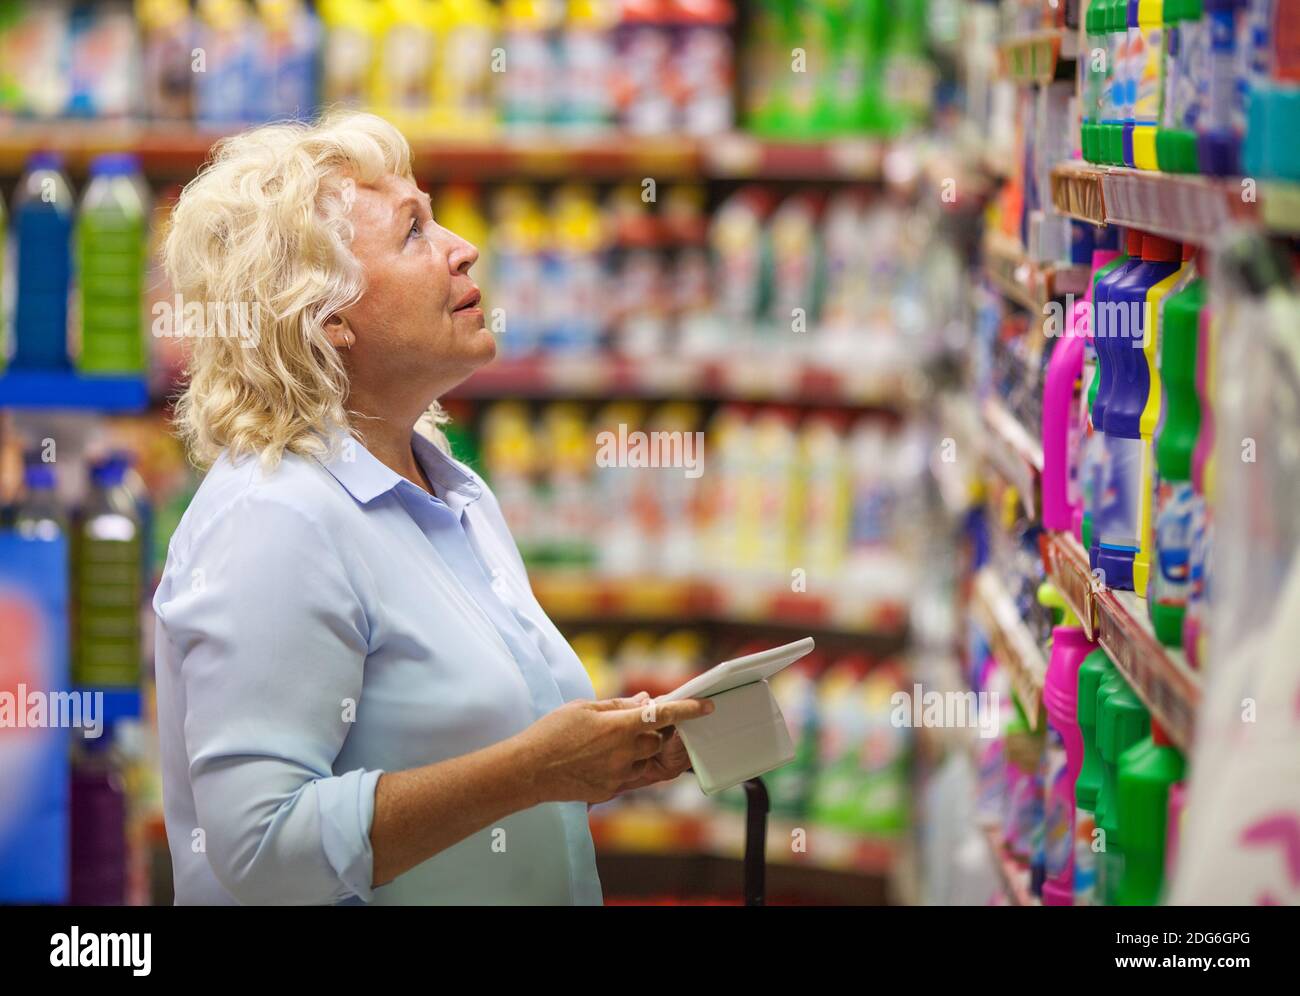 Woman with pad shopping for household detergents Stock Photo